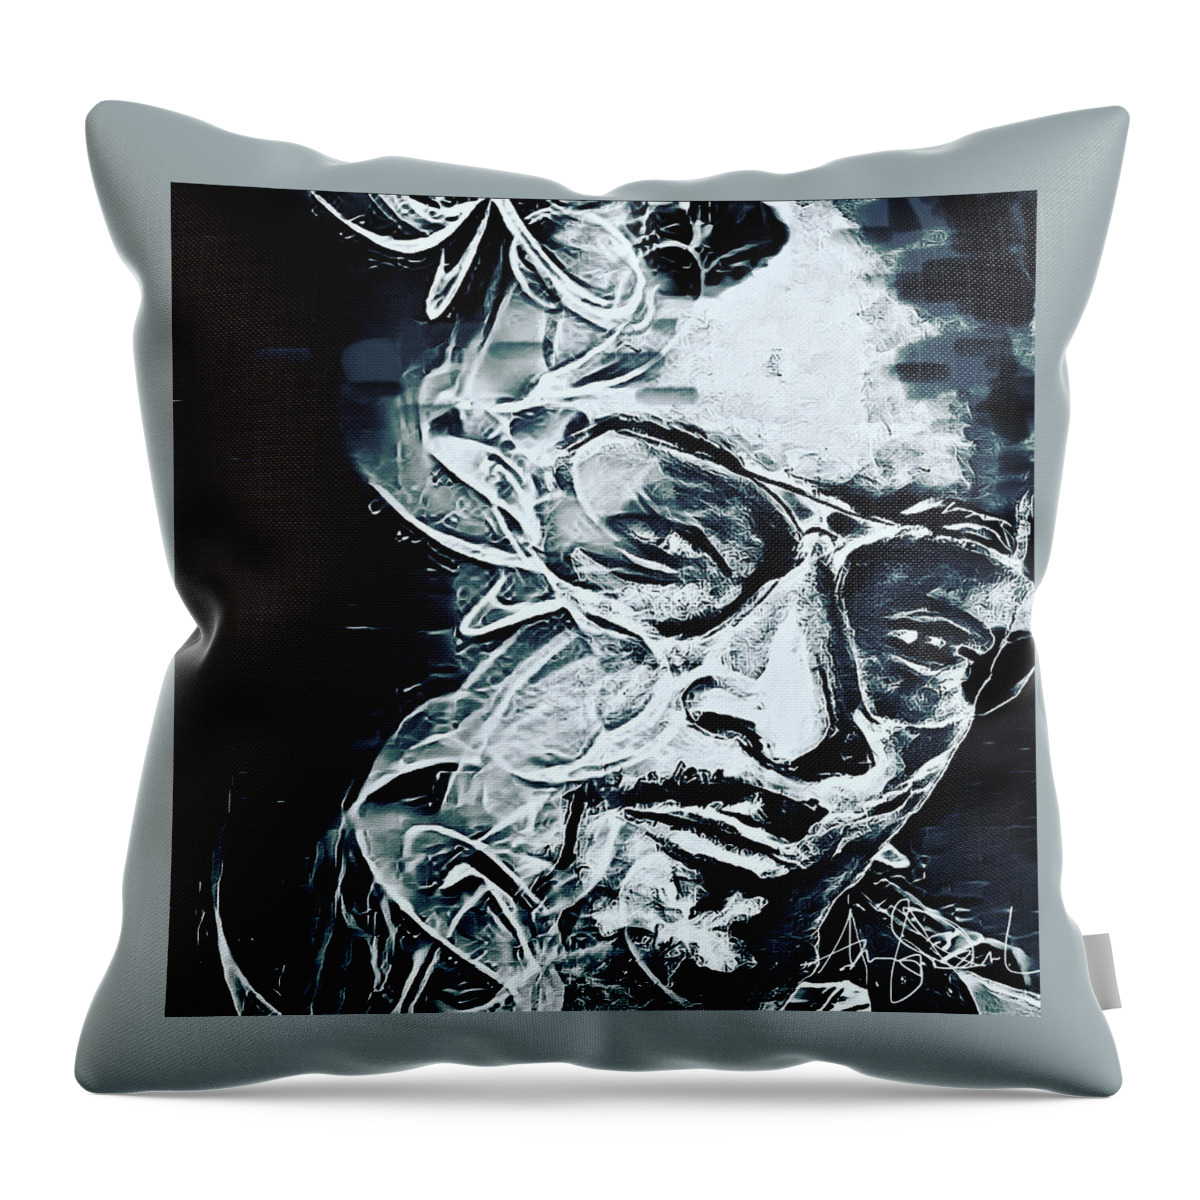  Throw Pillow featuring the mixed media Smoke by Angie ONeal